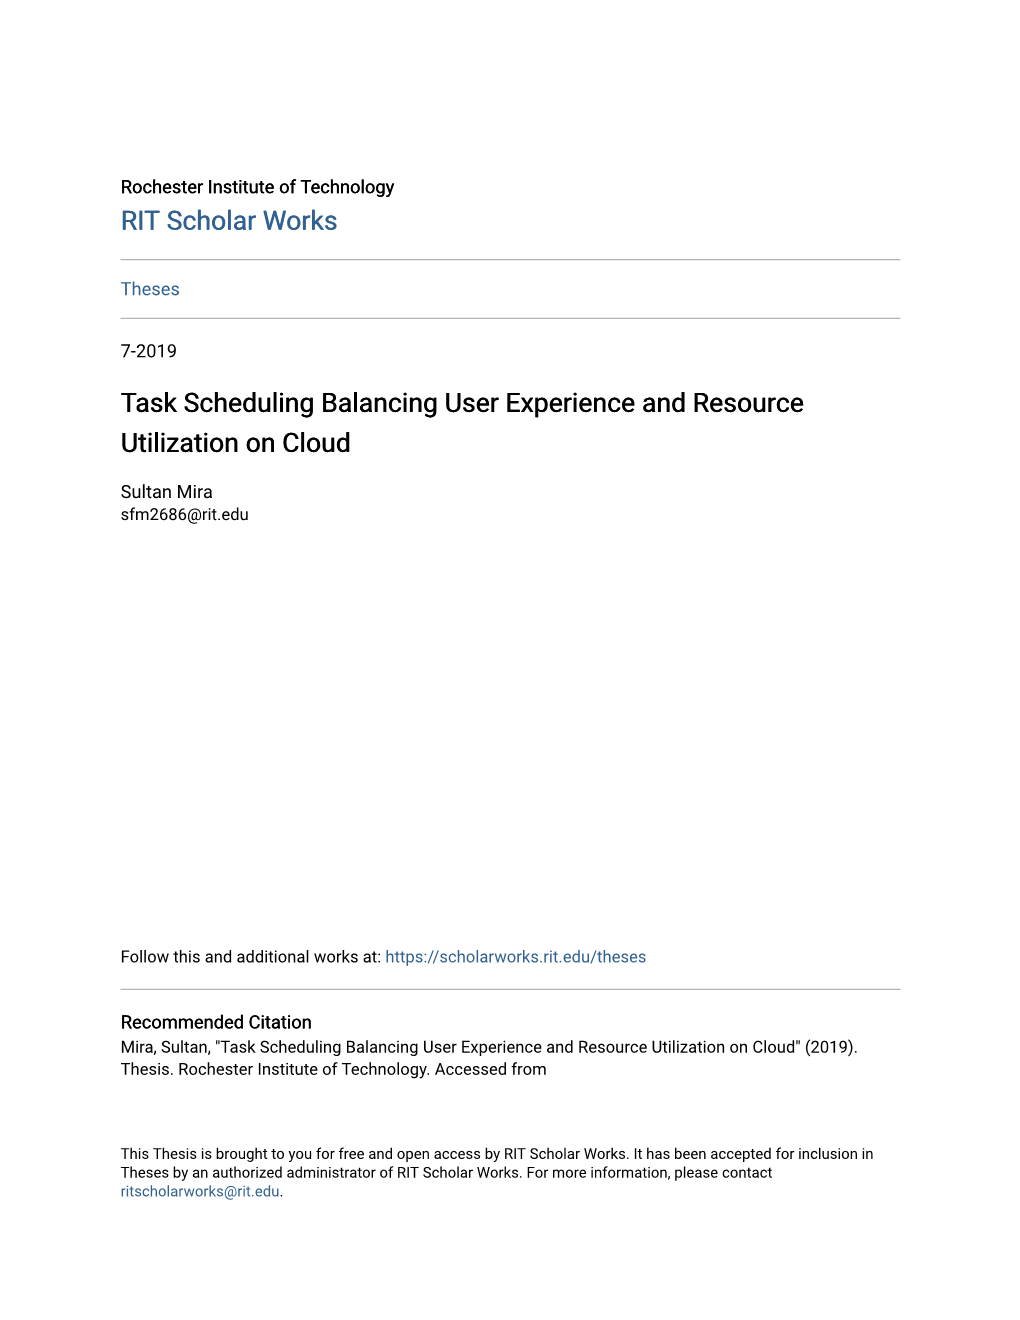 Task Scheduling Balancing User Experience and Resource Utilization on Cloud